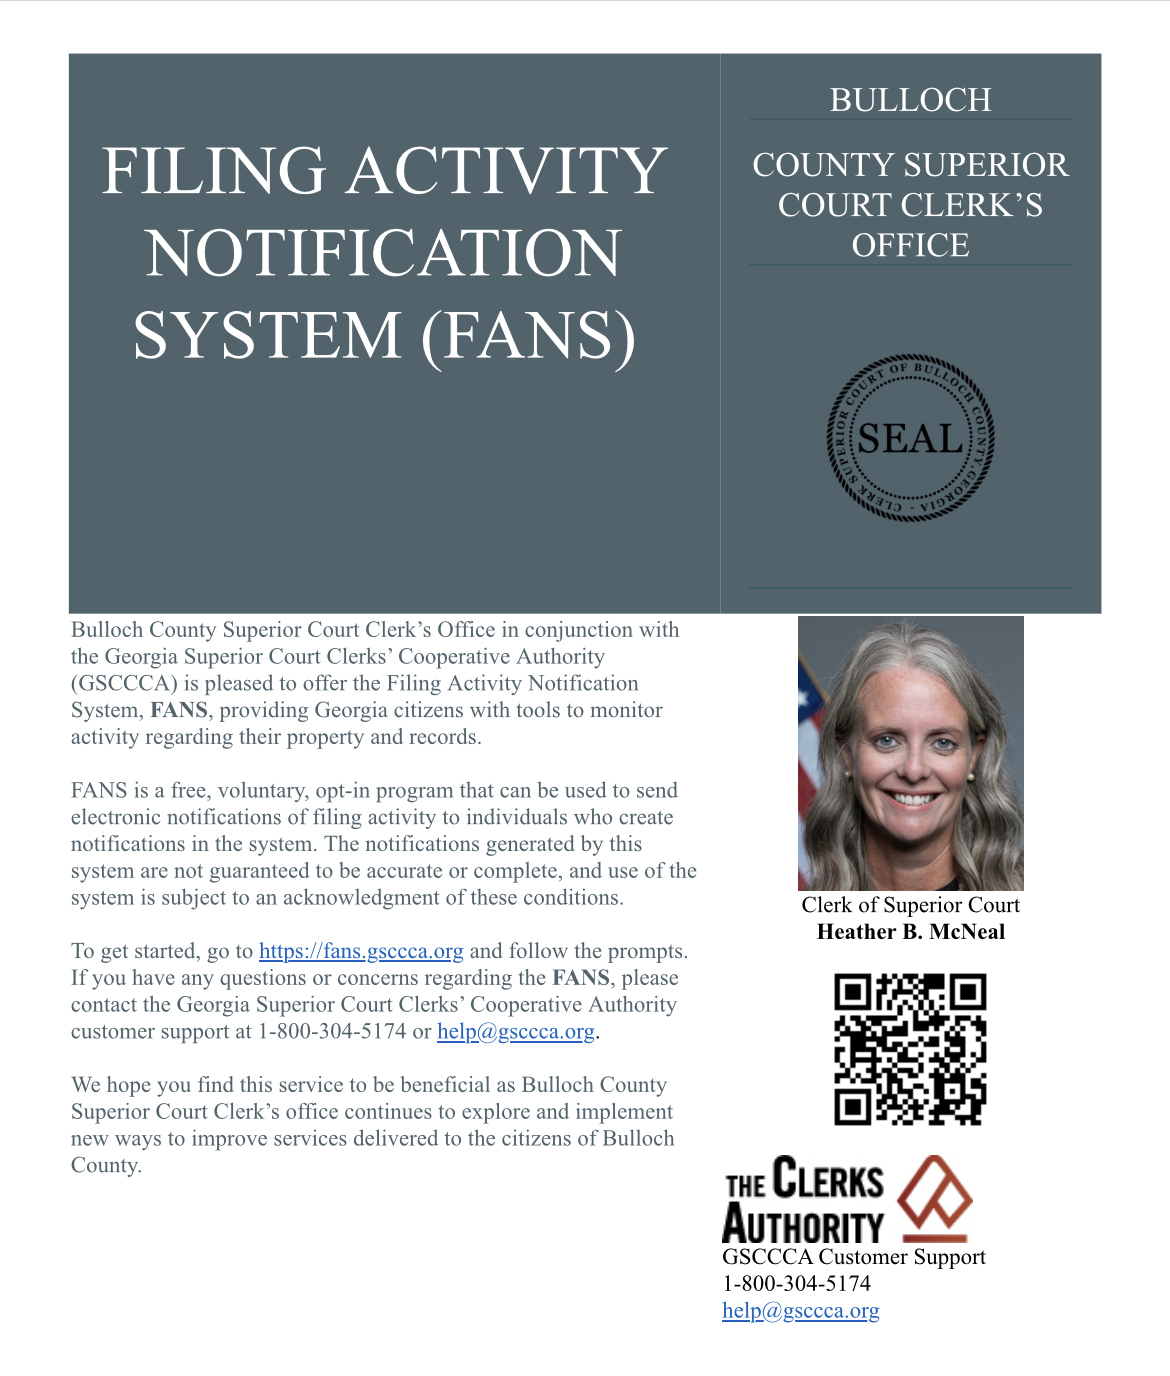 Bulloch Co Superior Court Clerk s Office GSCCCA Now Offering F A N S